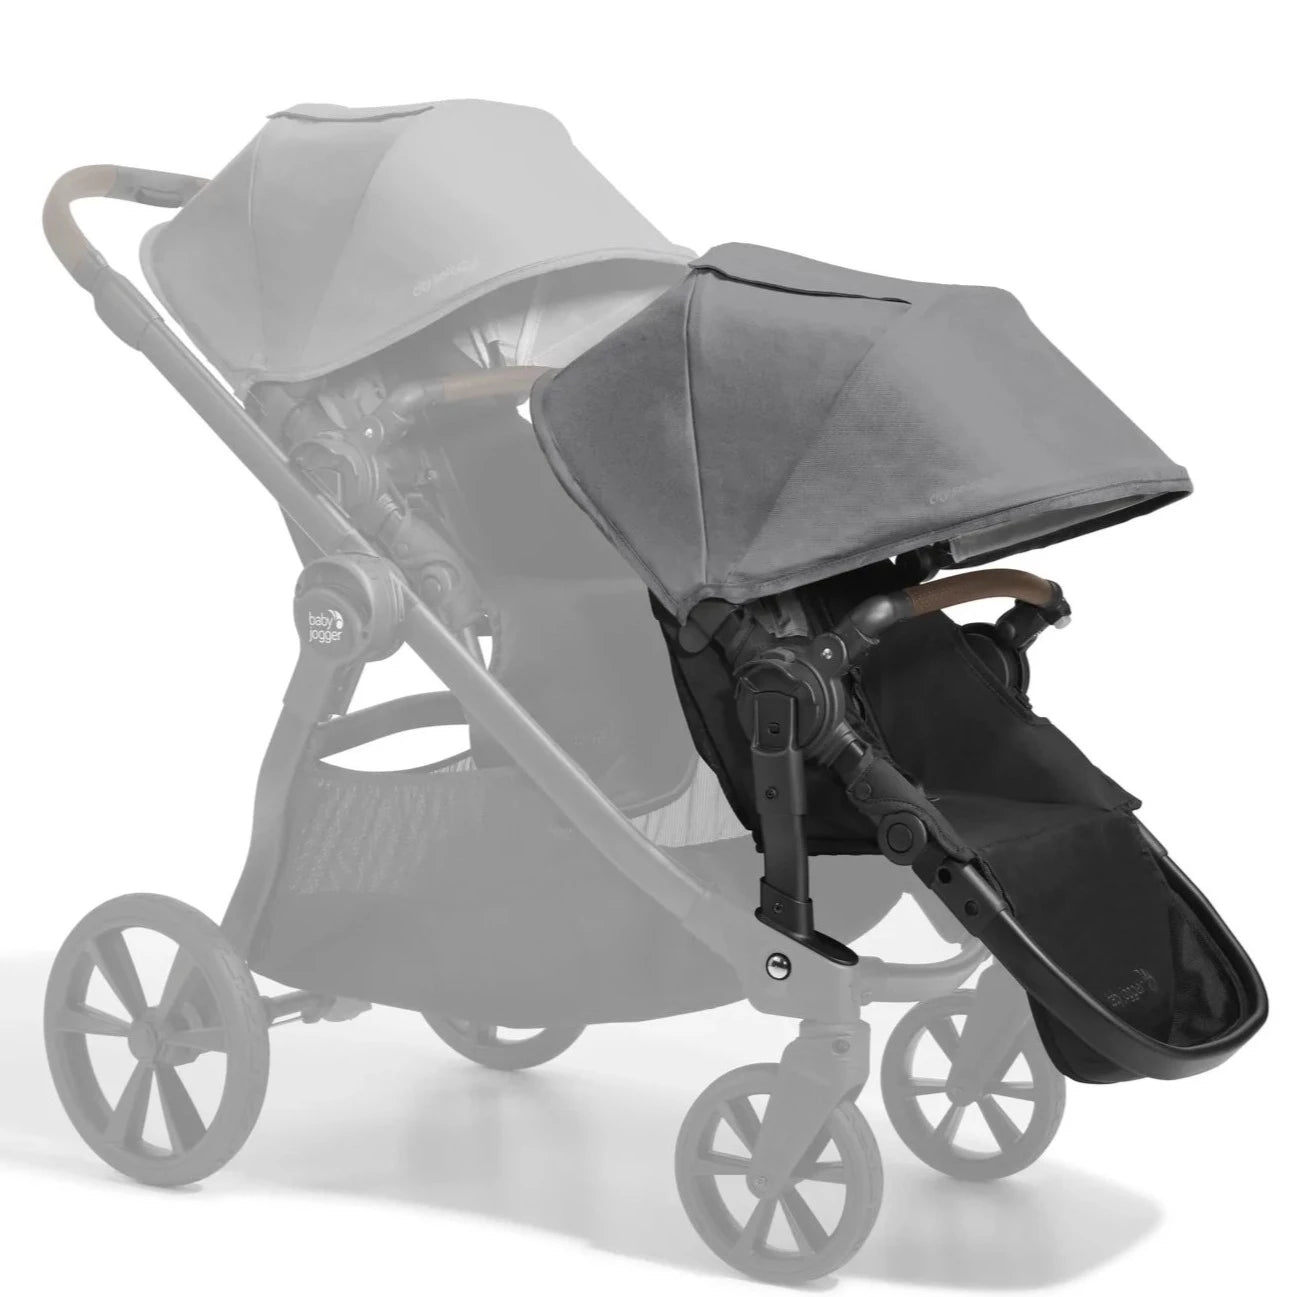 Shop Jogger-Set Kid for Kid Two-Seater starting at 2018 Model now